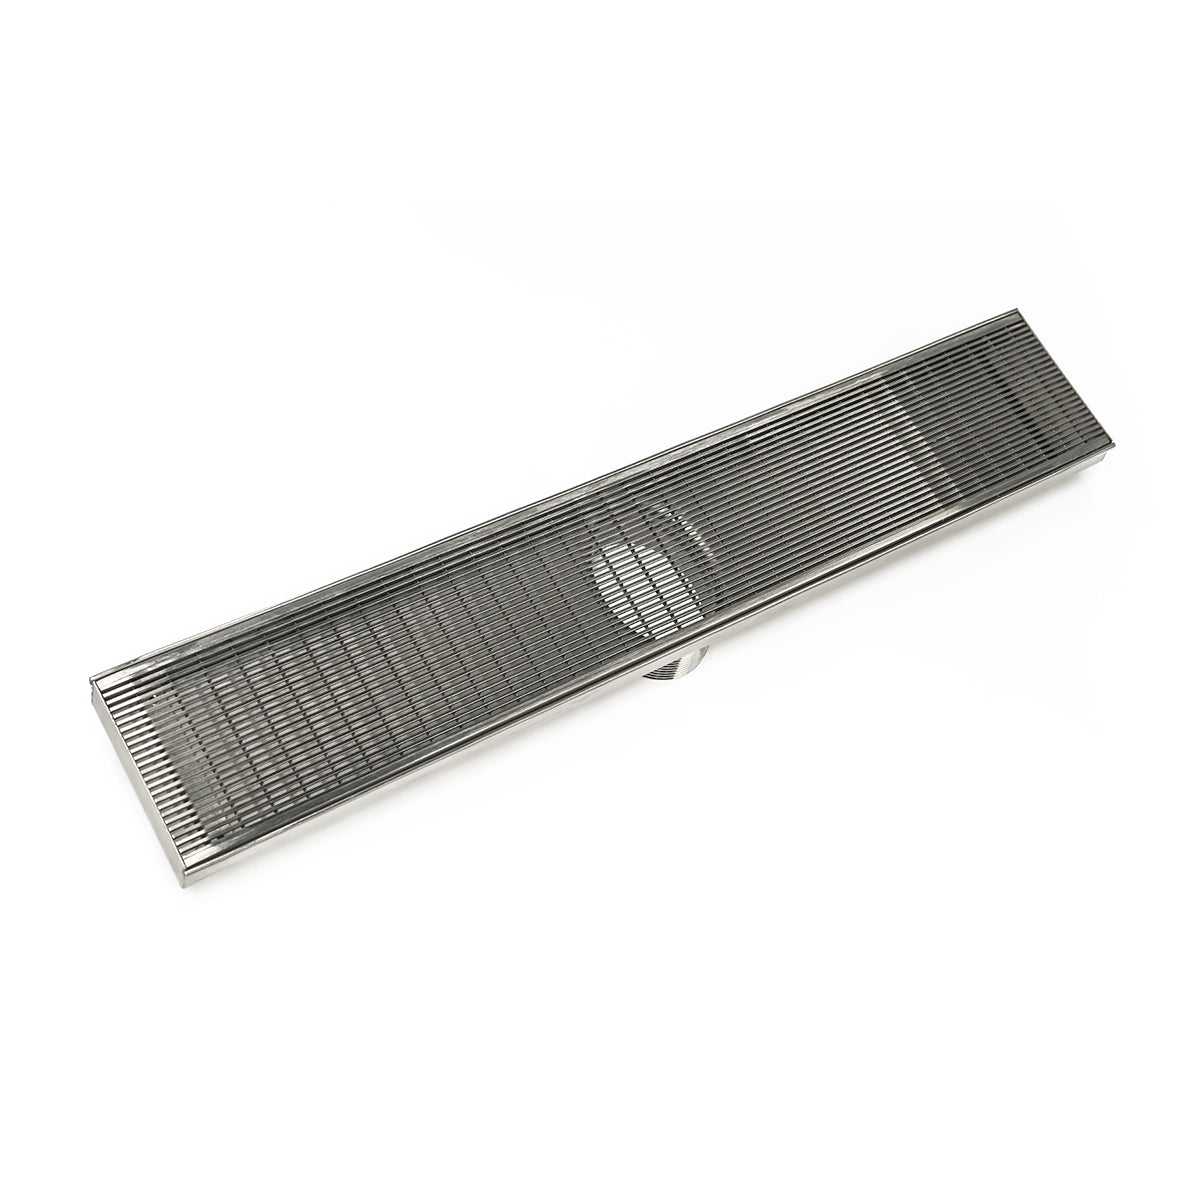 Infinity Drain 48" FX Series High Flow Fixed Length Linear Drain Kit with Wedge Wire Grate with Cast Iron Drain Body